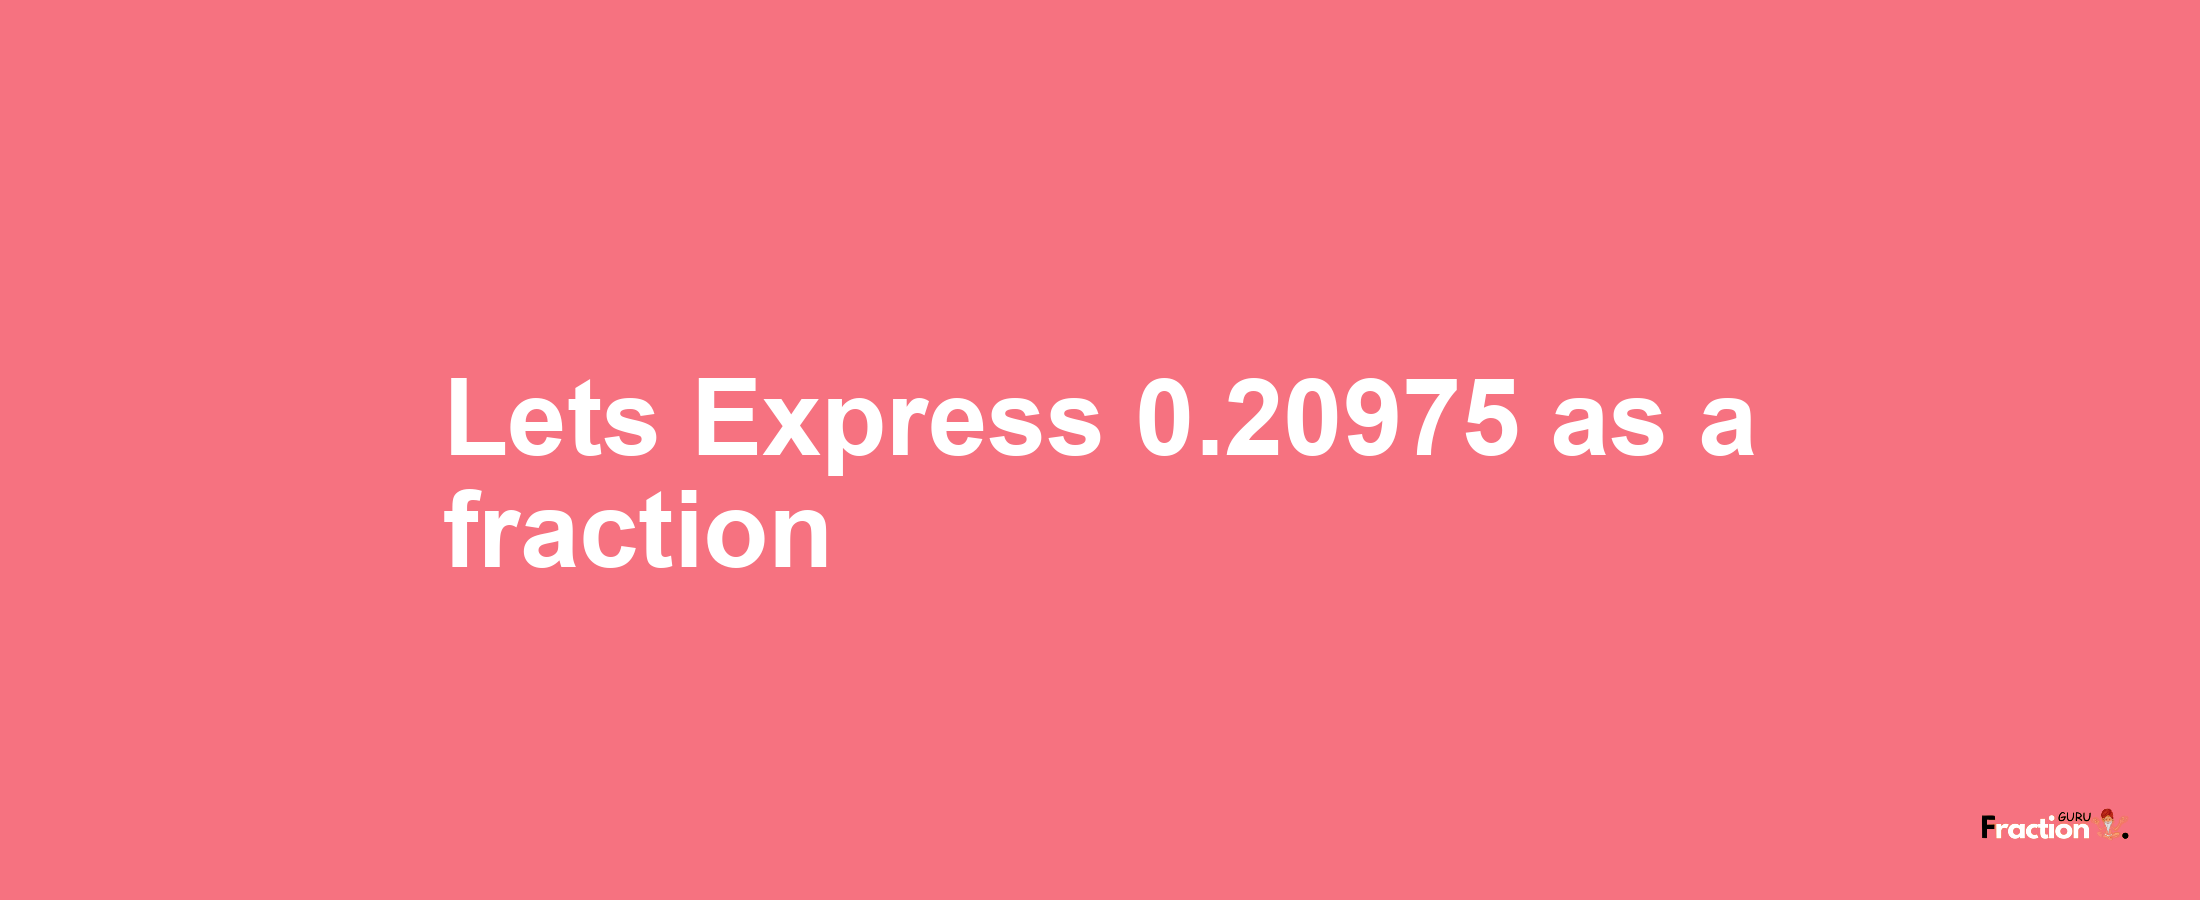 Lets Express 0.20975 as afraction